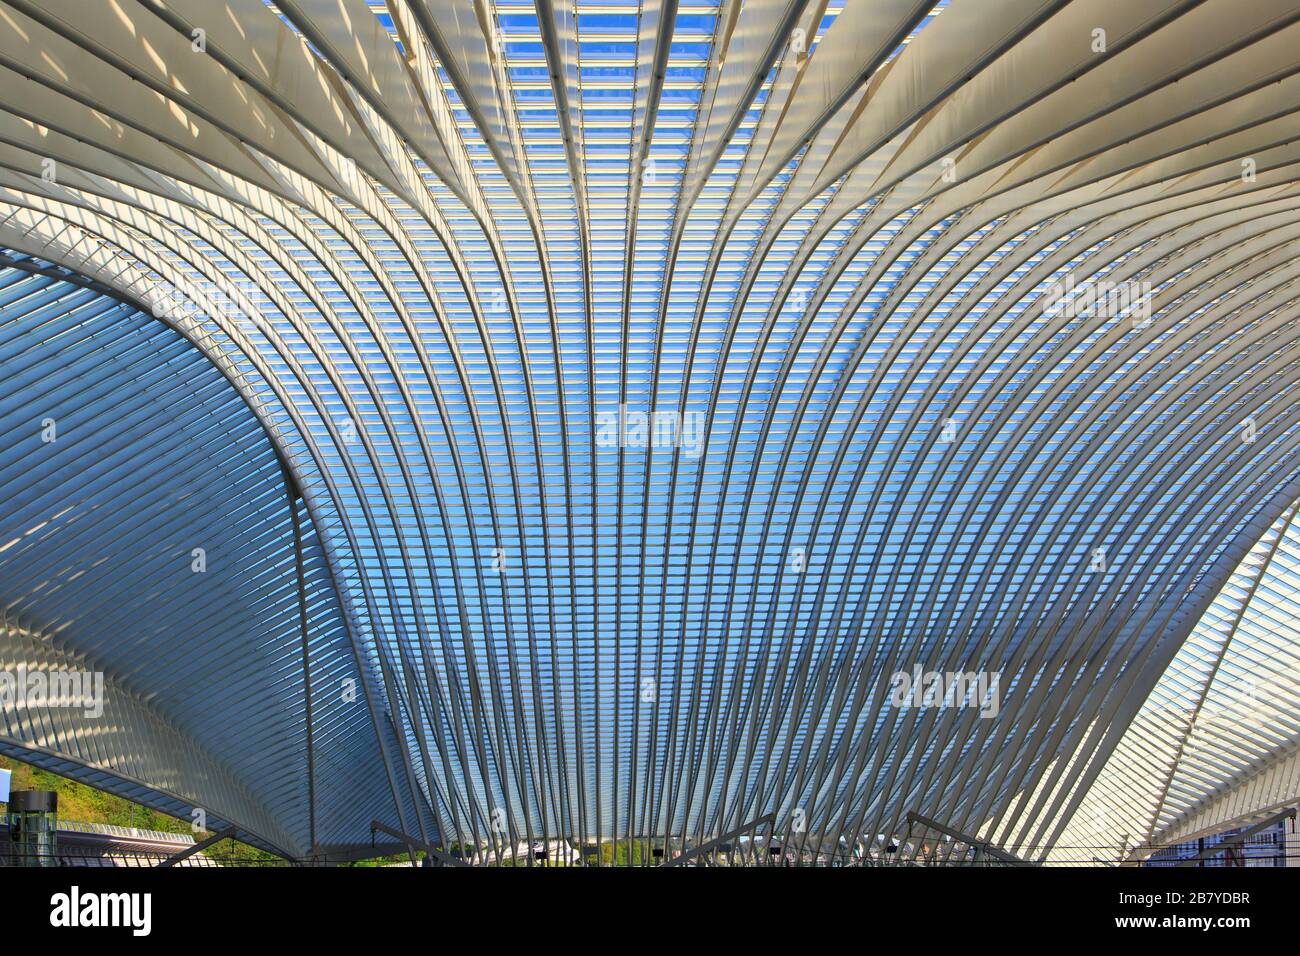 The curbed glass ceiling/roof of the Liege-Guillemins railway station (2009) by Santiago Calatrava in Liege, Belgium Stock Photo